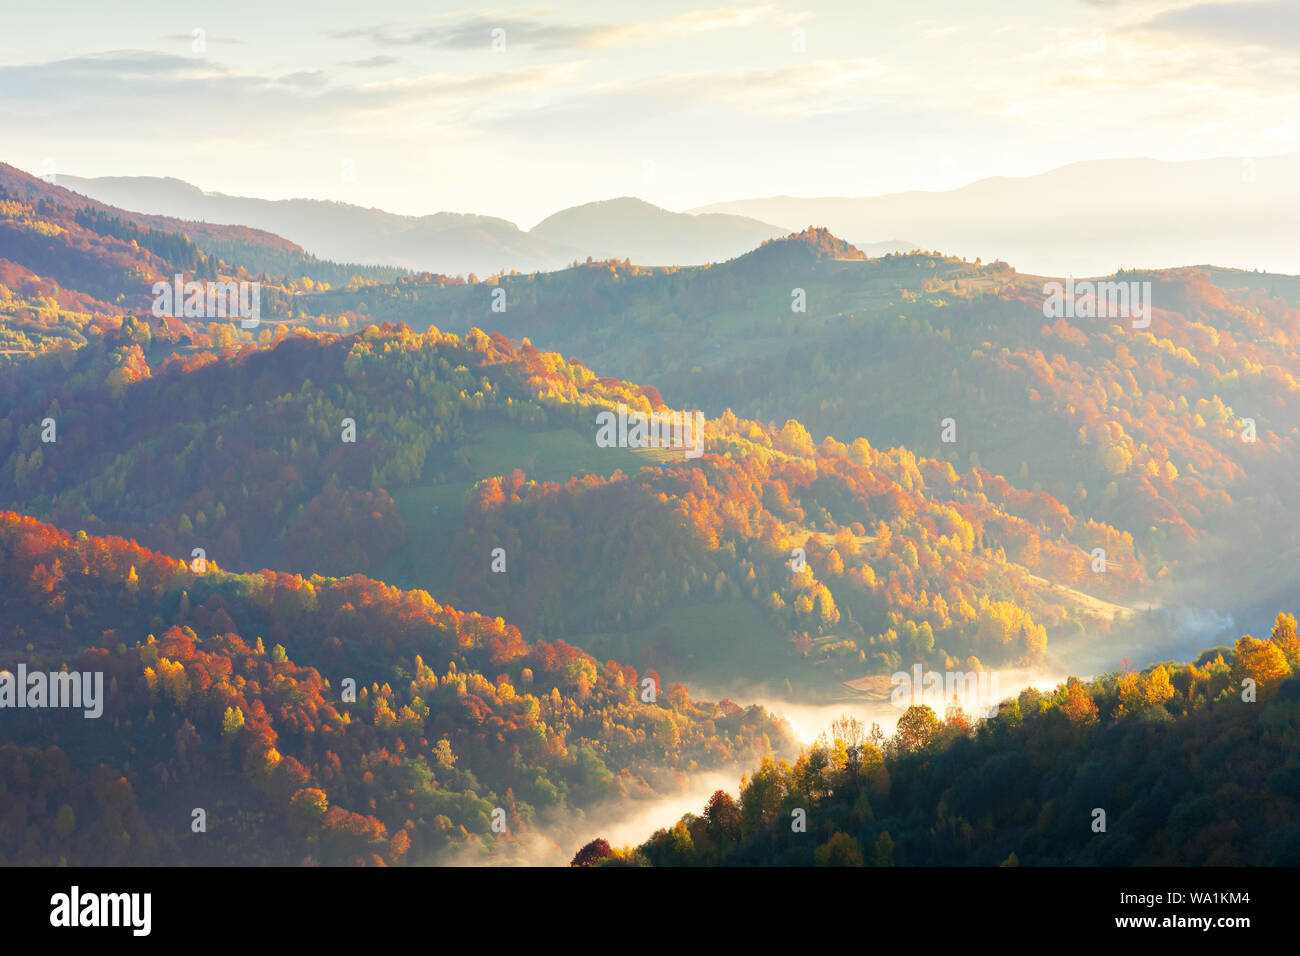 fog in the valley at sunrise. beautiful autumn scenery in mountains. forest on the hill in fall foliage. fluffy clouds on the sky Stock Photo